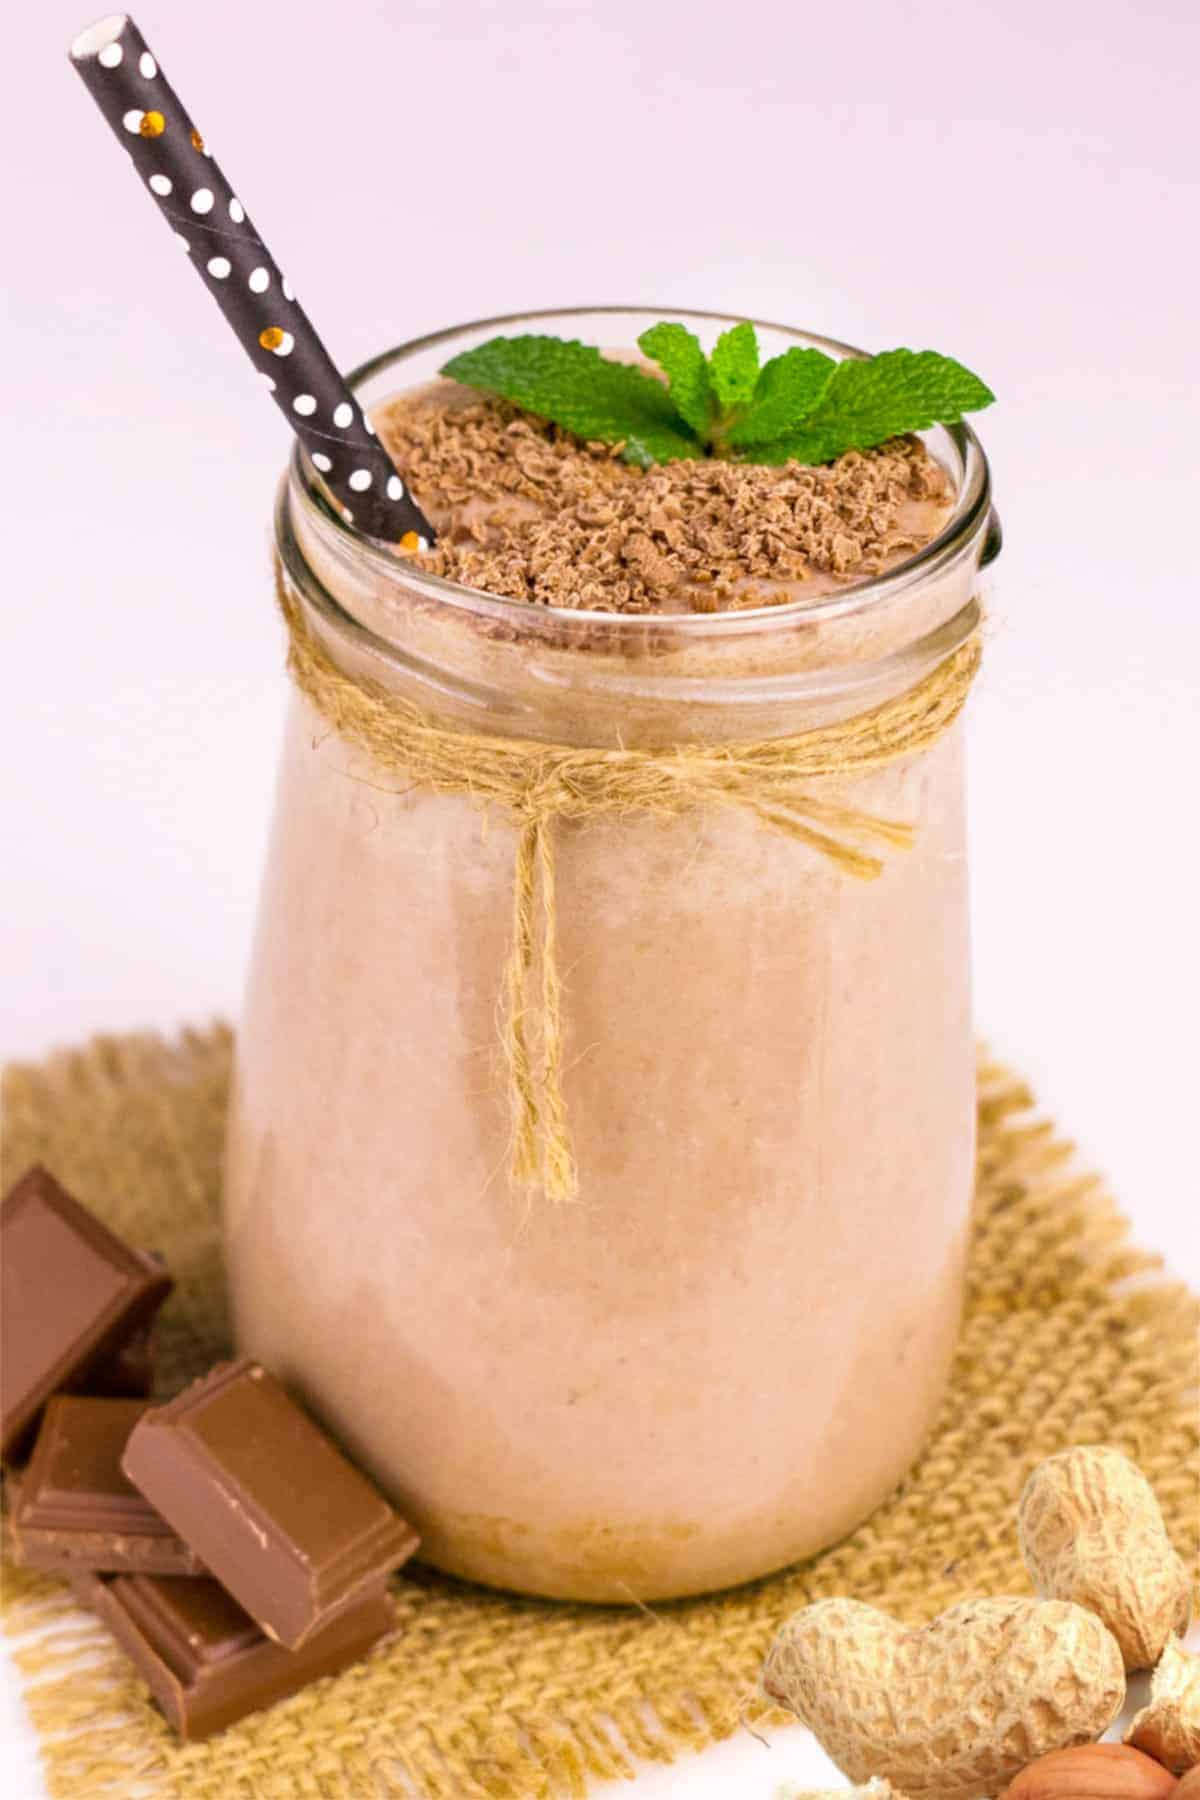 Keto Peanut Butter Cup Smoothie